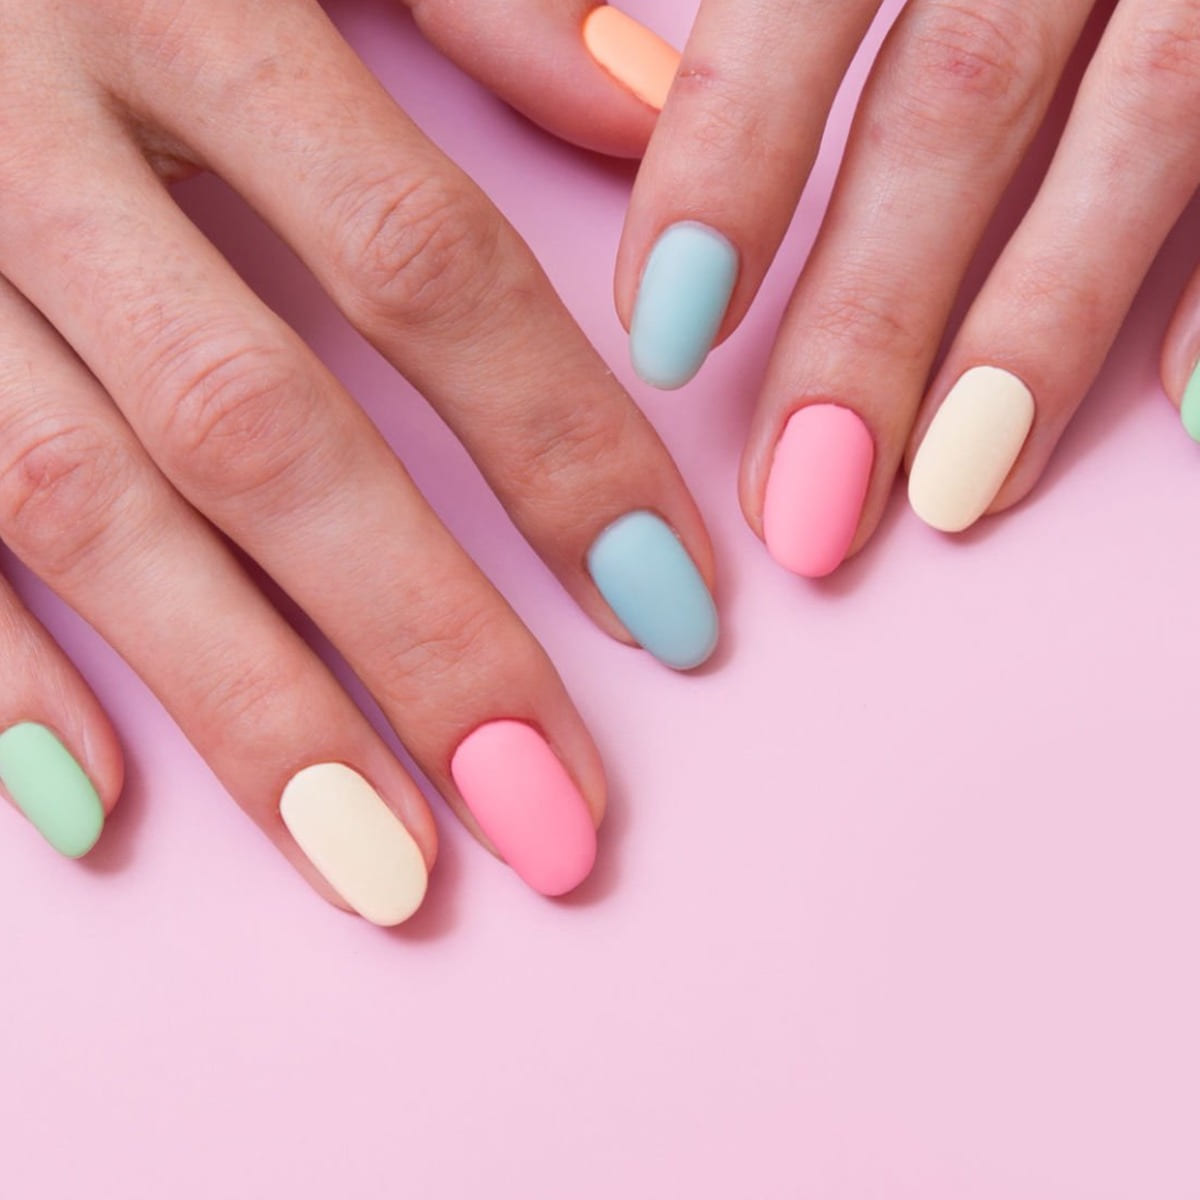 Pastel shades, coloured nails, trend look